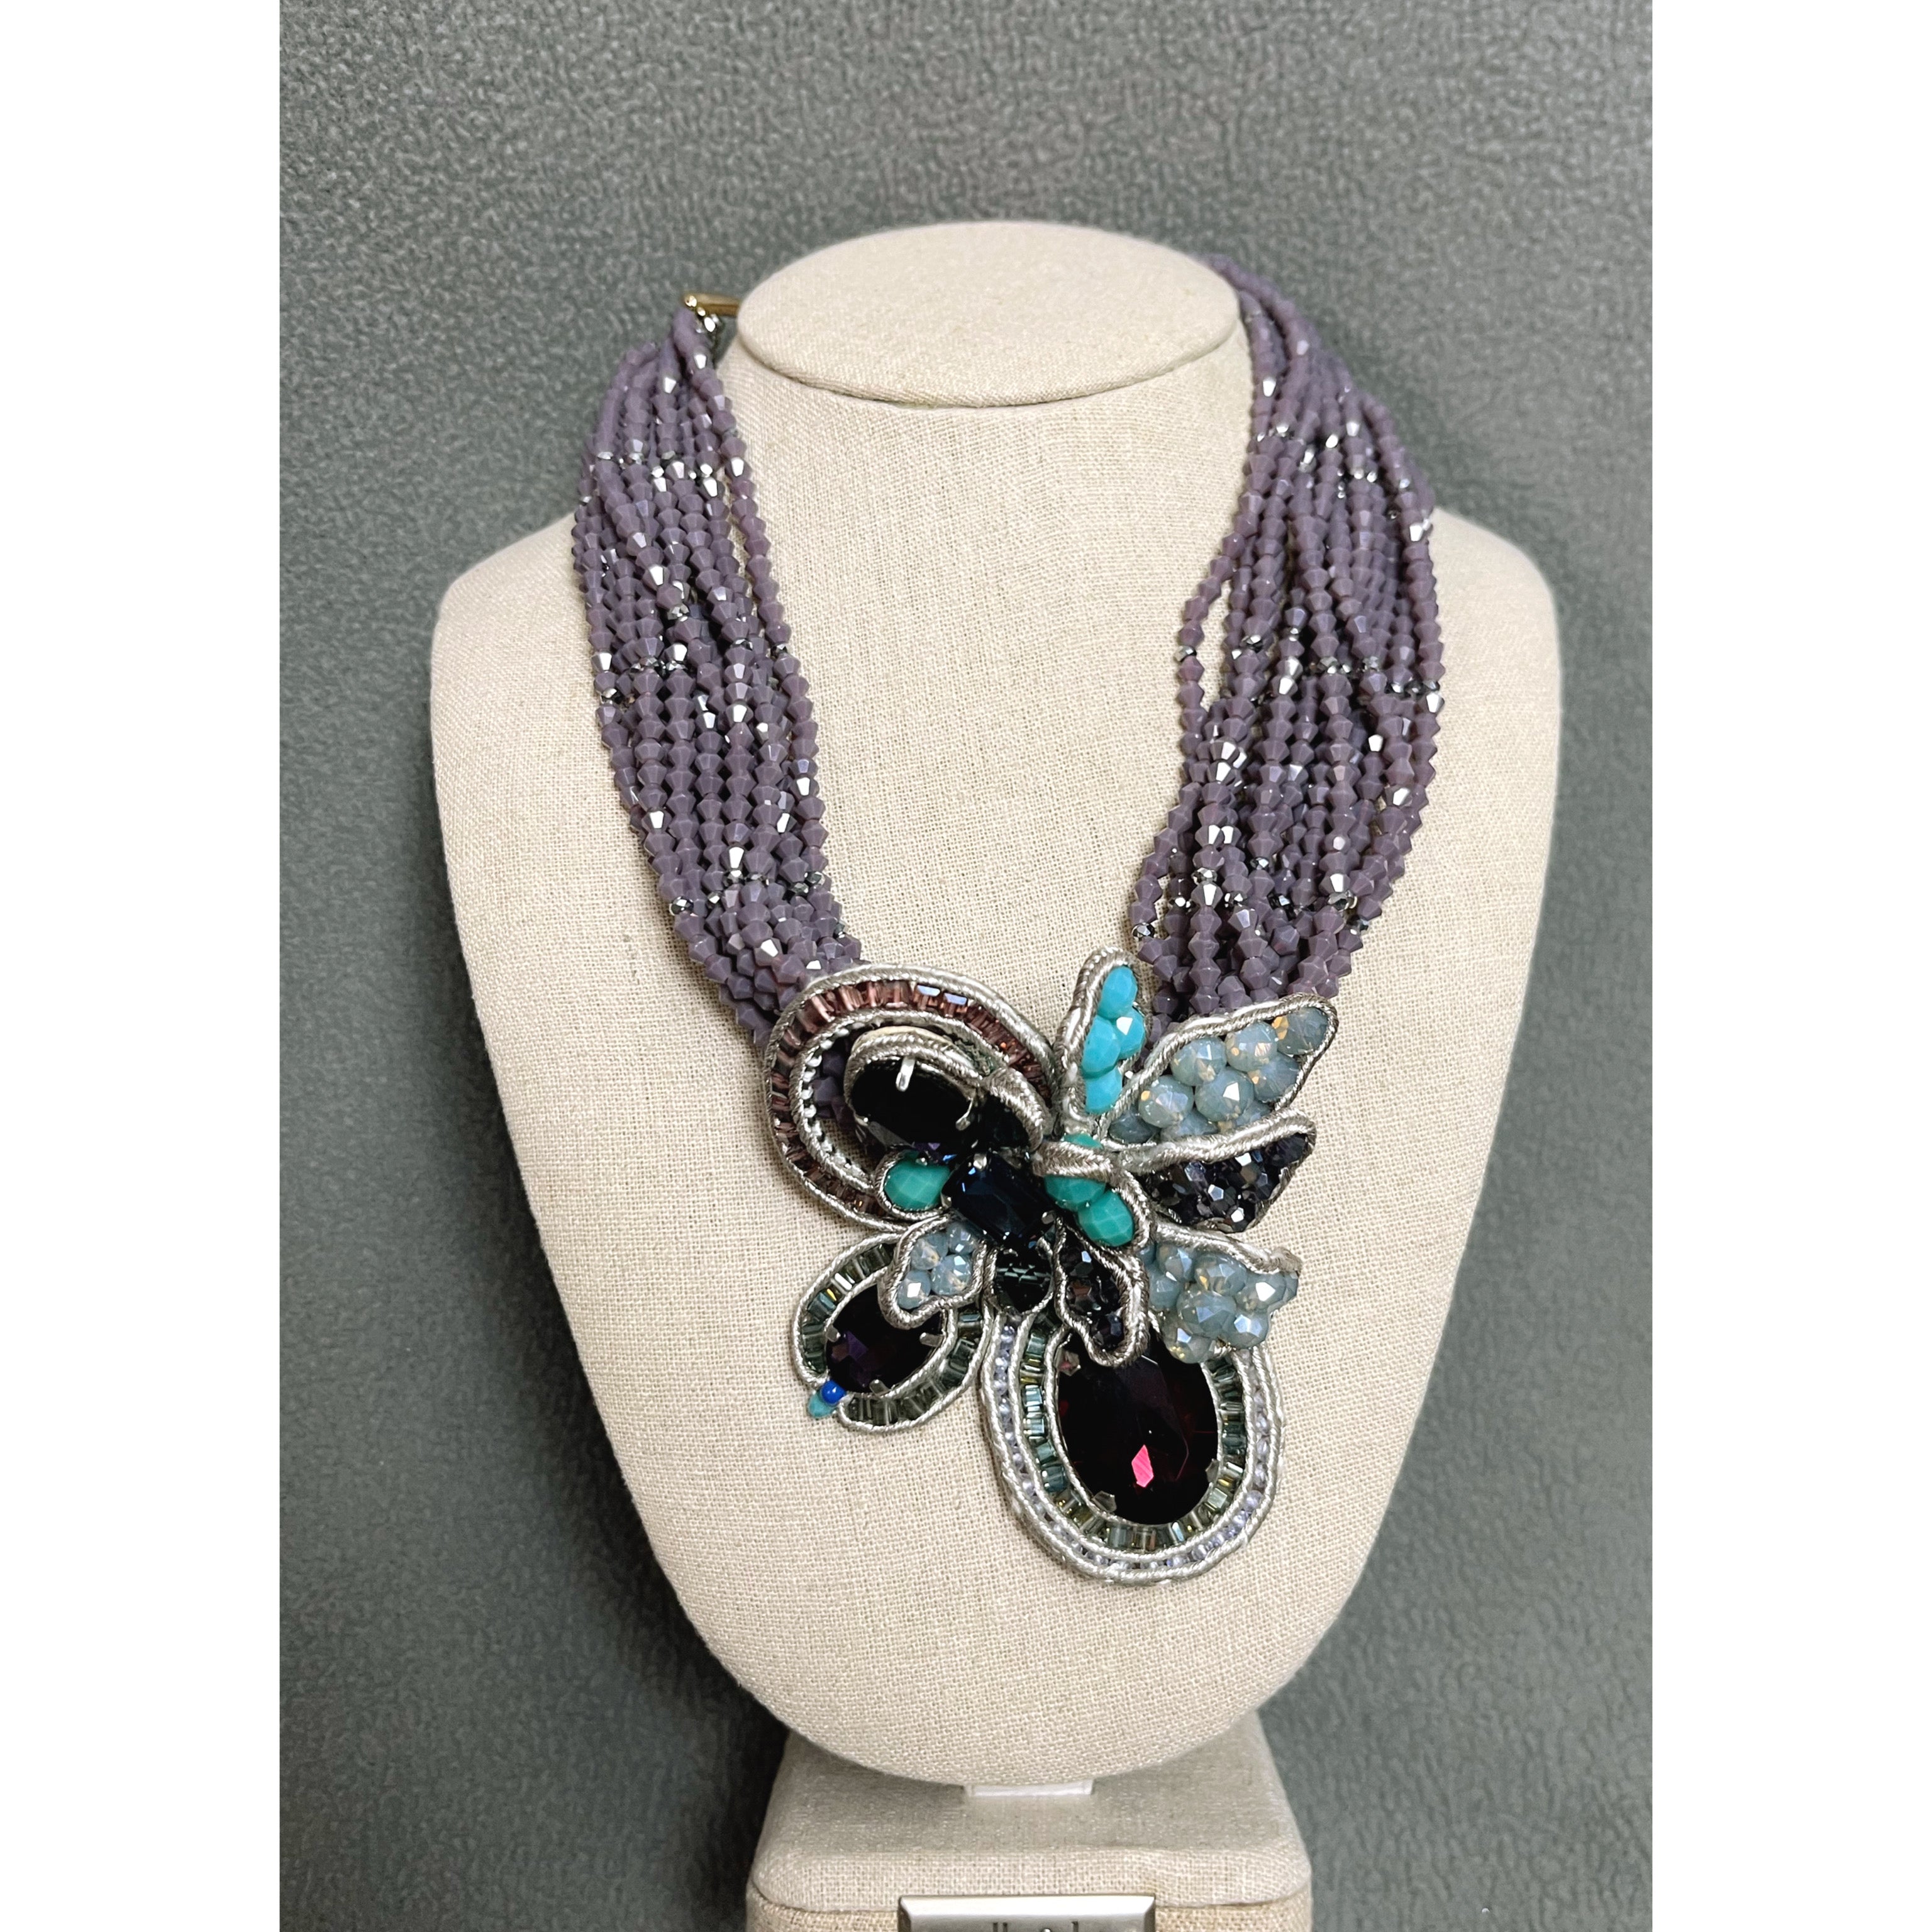 Amethyst & Turquoise statement necklace